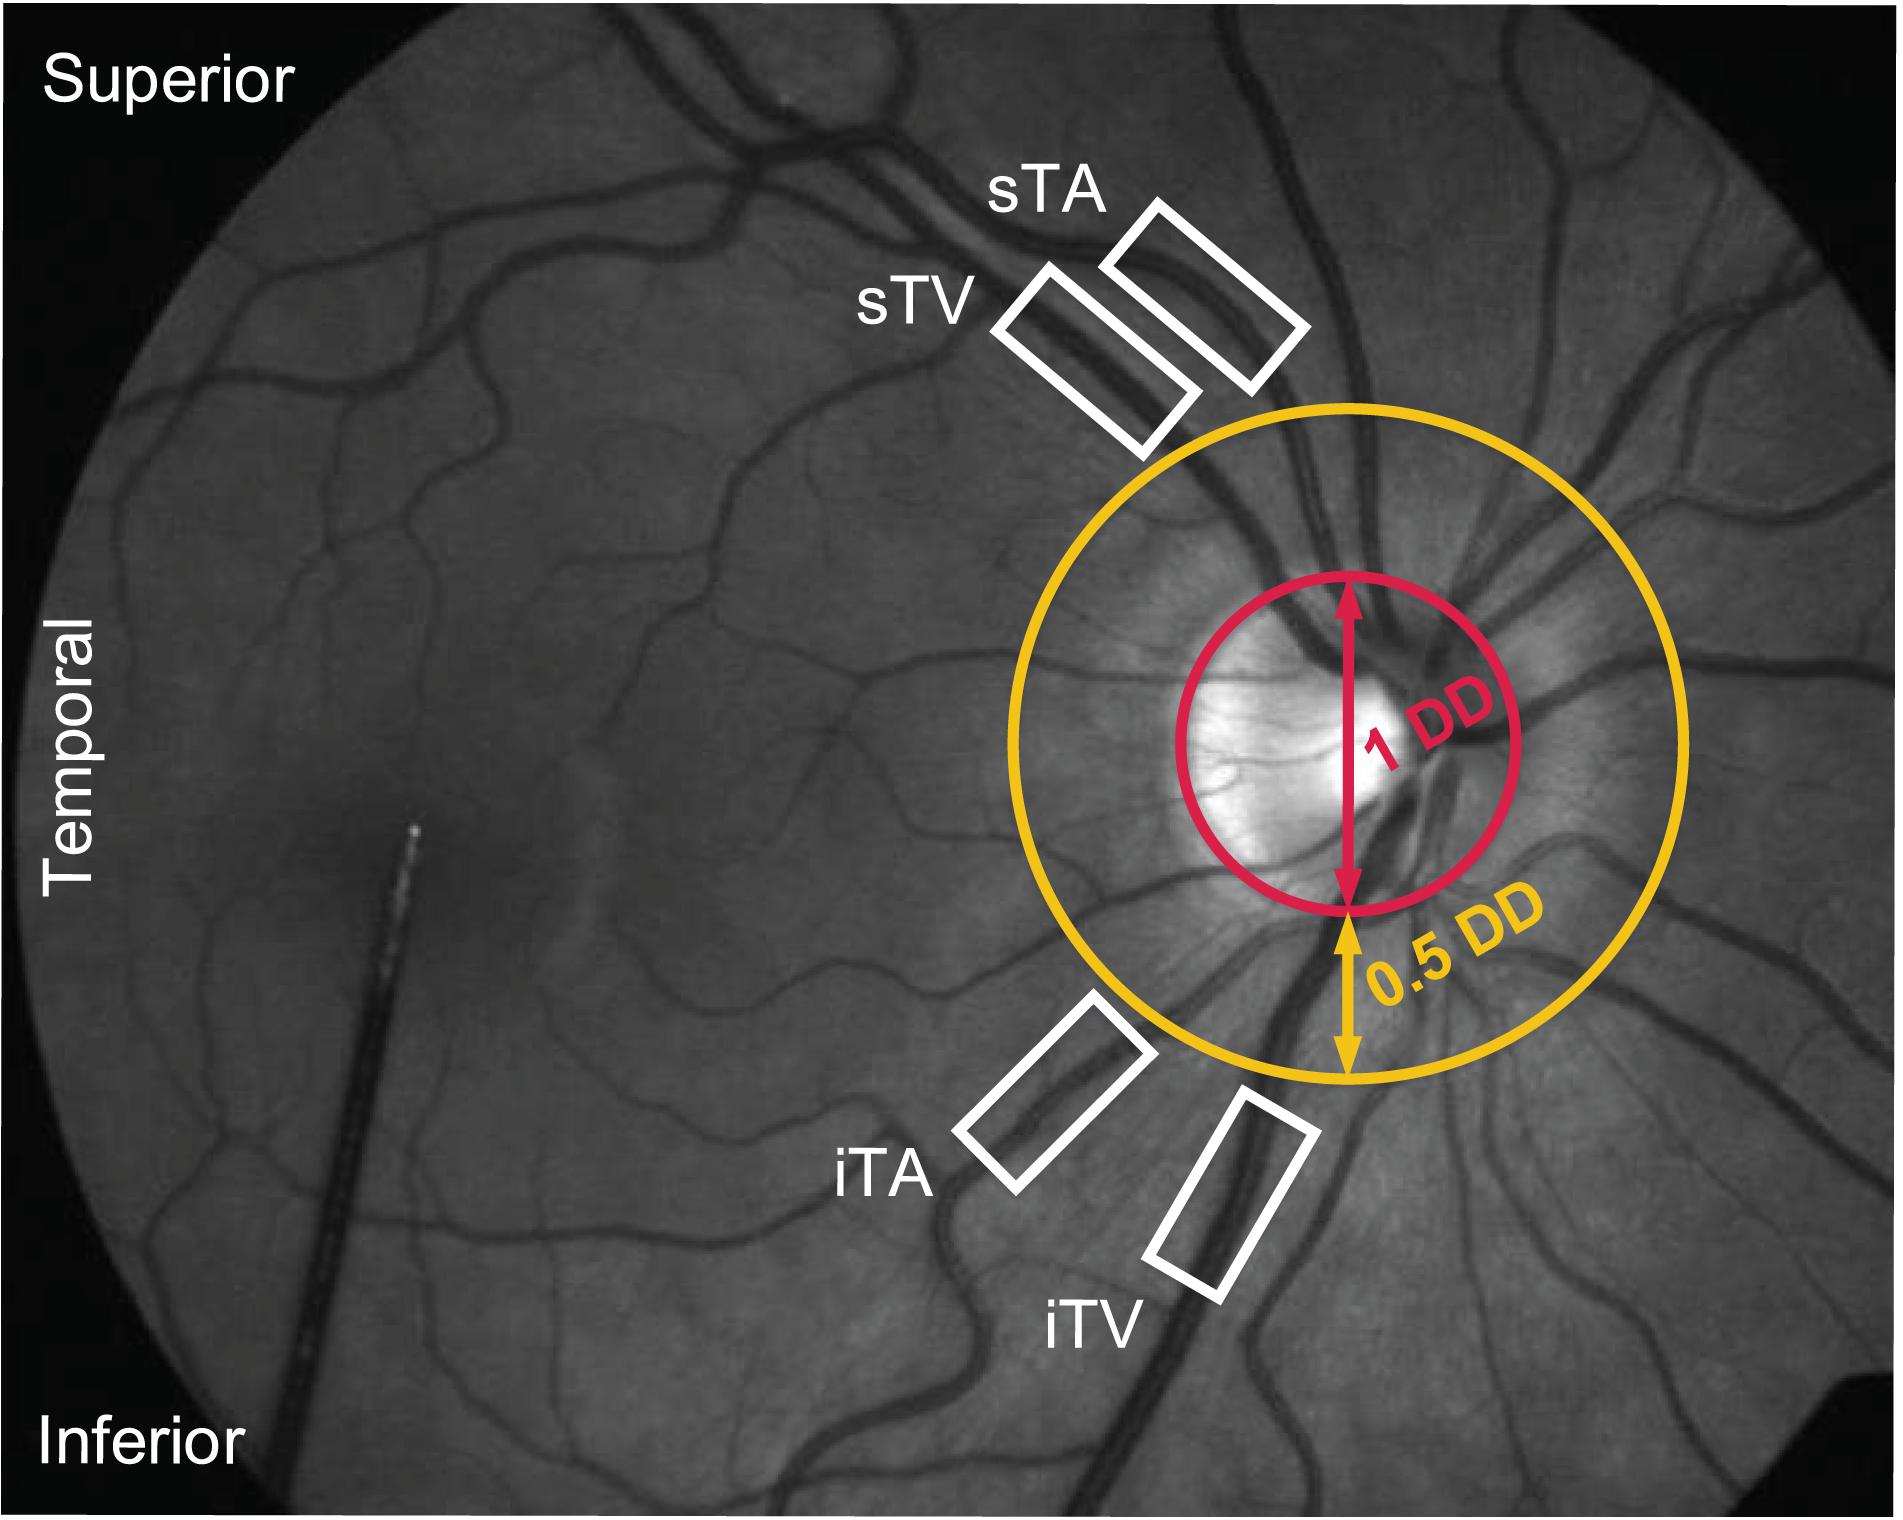 Frontiers  Retinal Vessel Responses to Flicker Stimulation Are